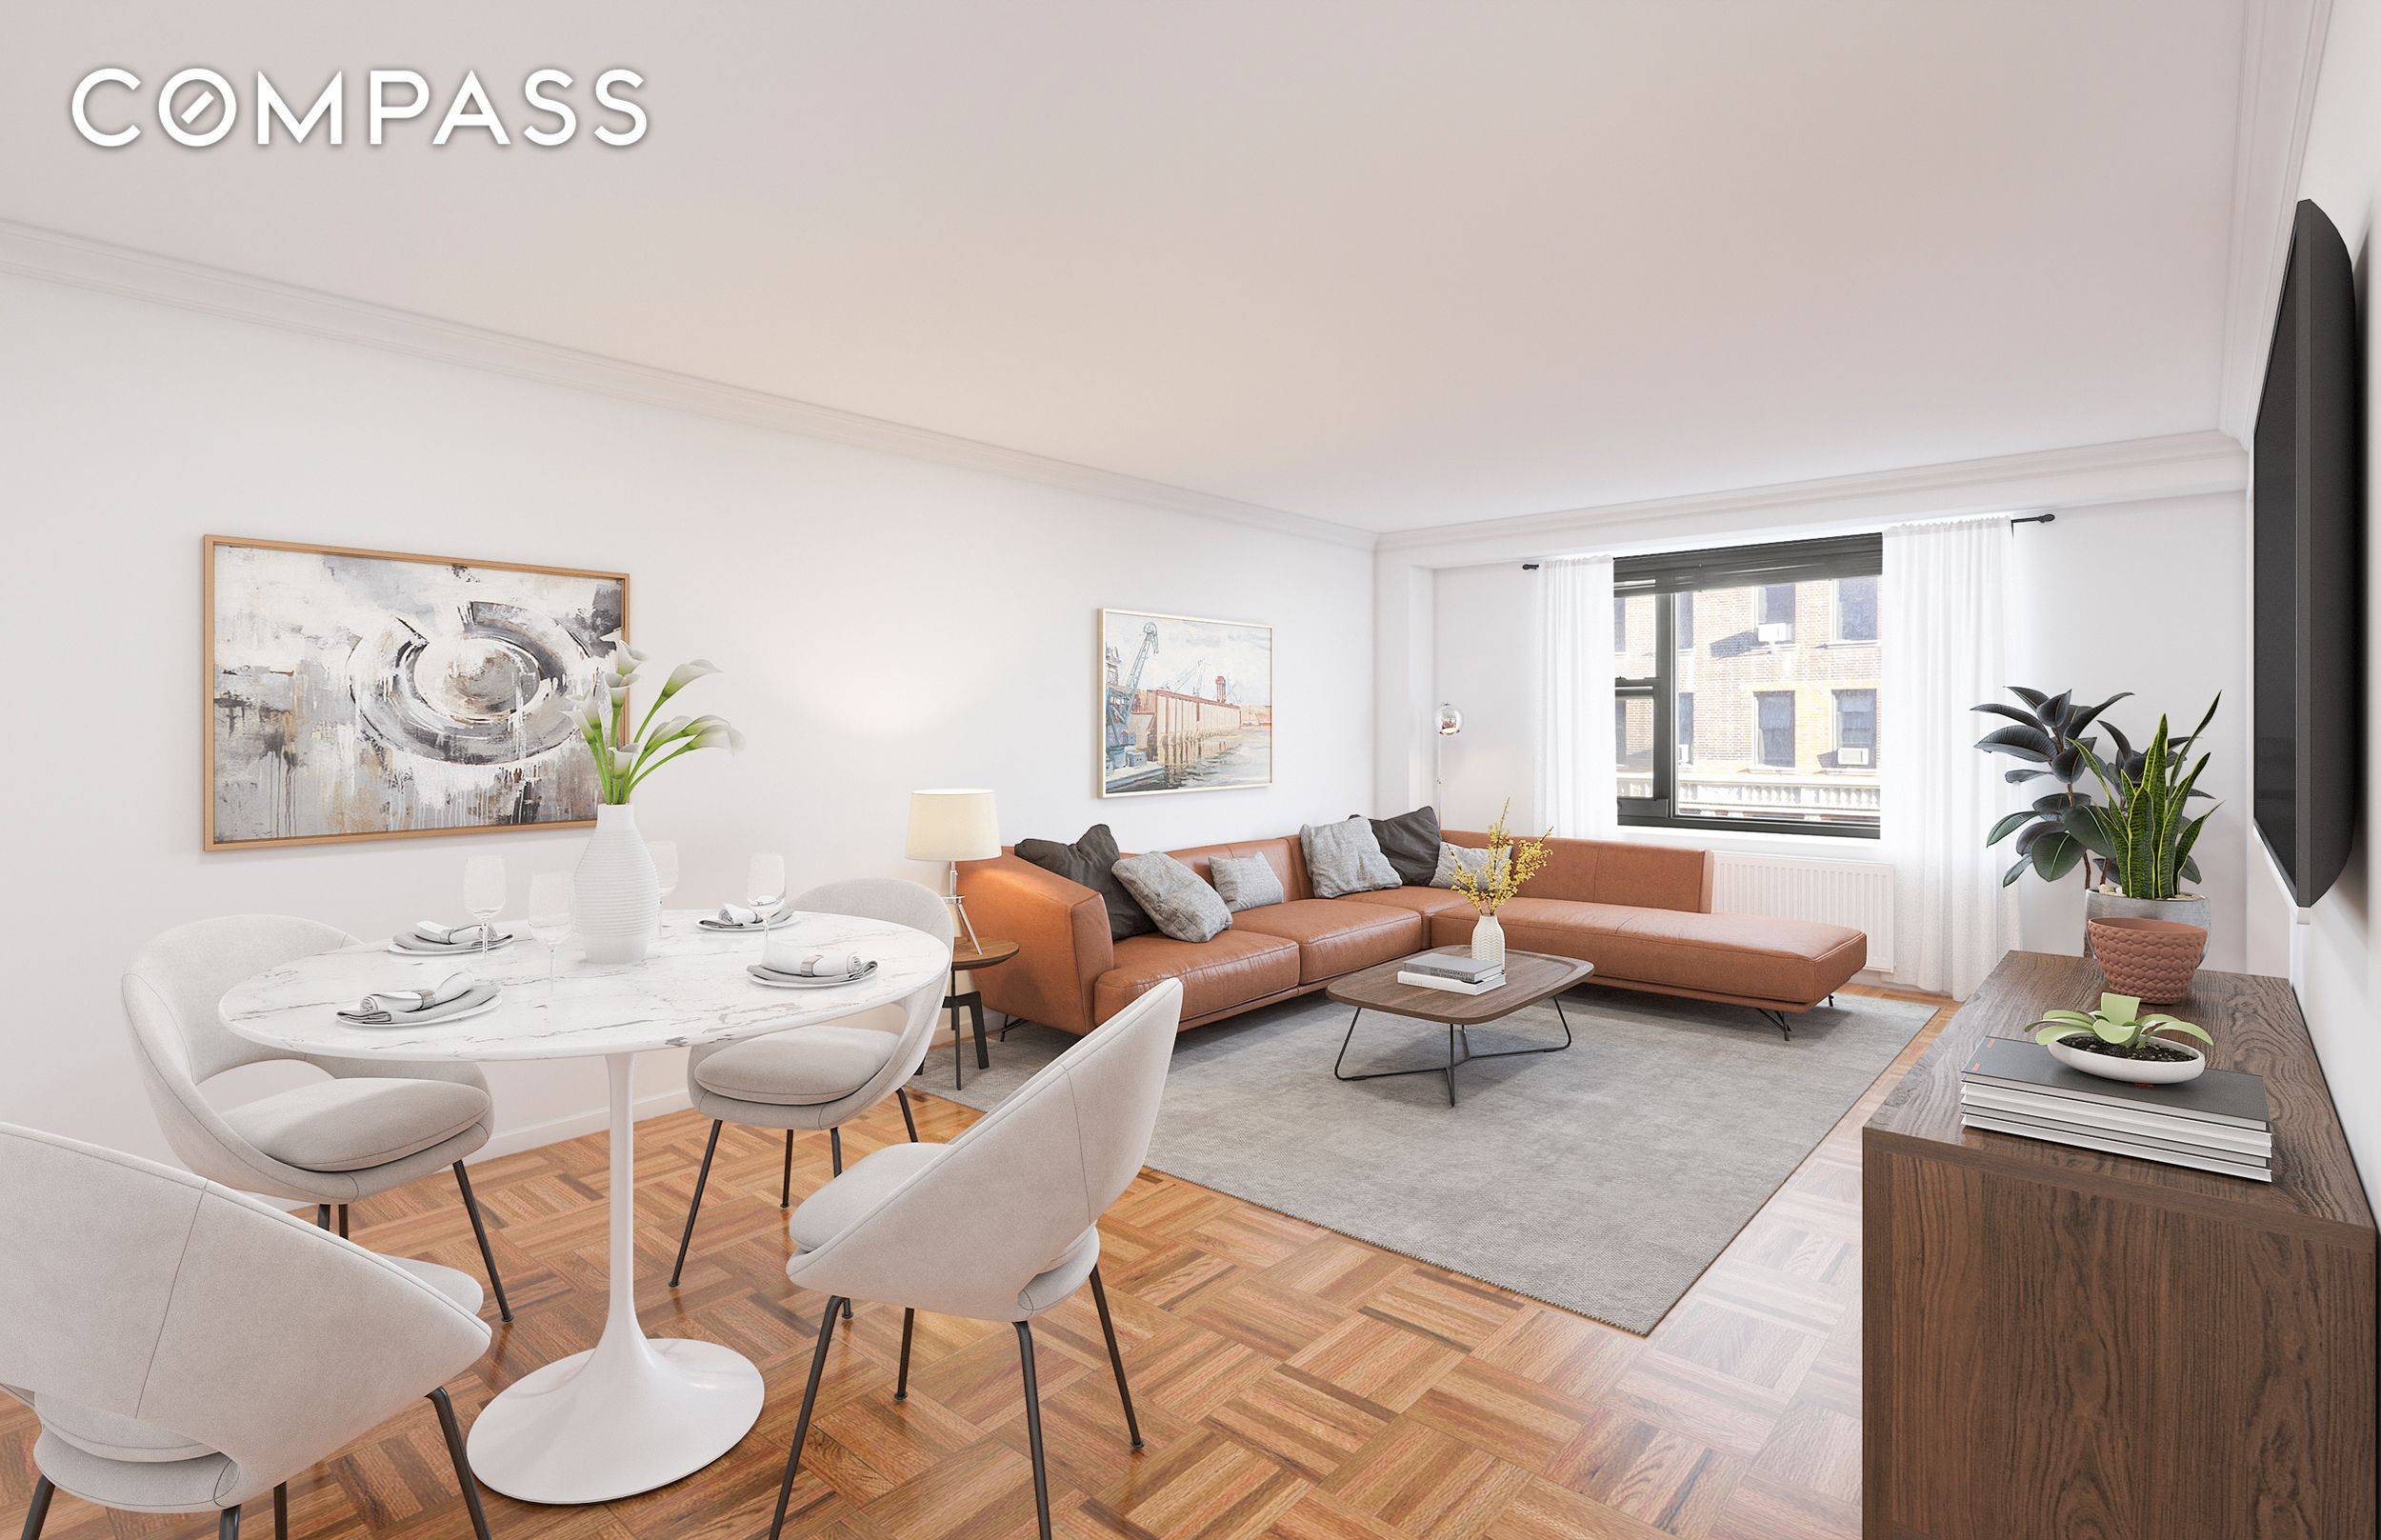 Spacious High Floor East Facing Junior 1 bedroom apartment in the heart of Murray Hill 10H is a large, bright apartment, flooded with eastern light each morning.